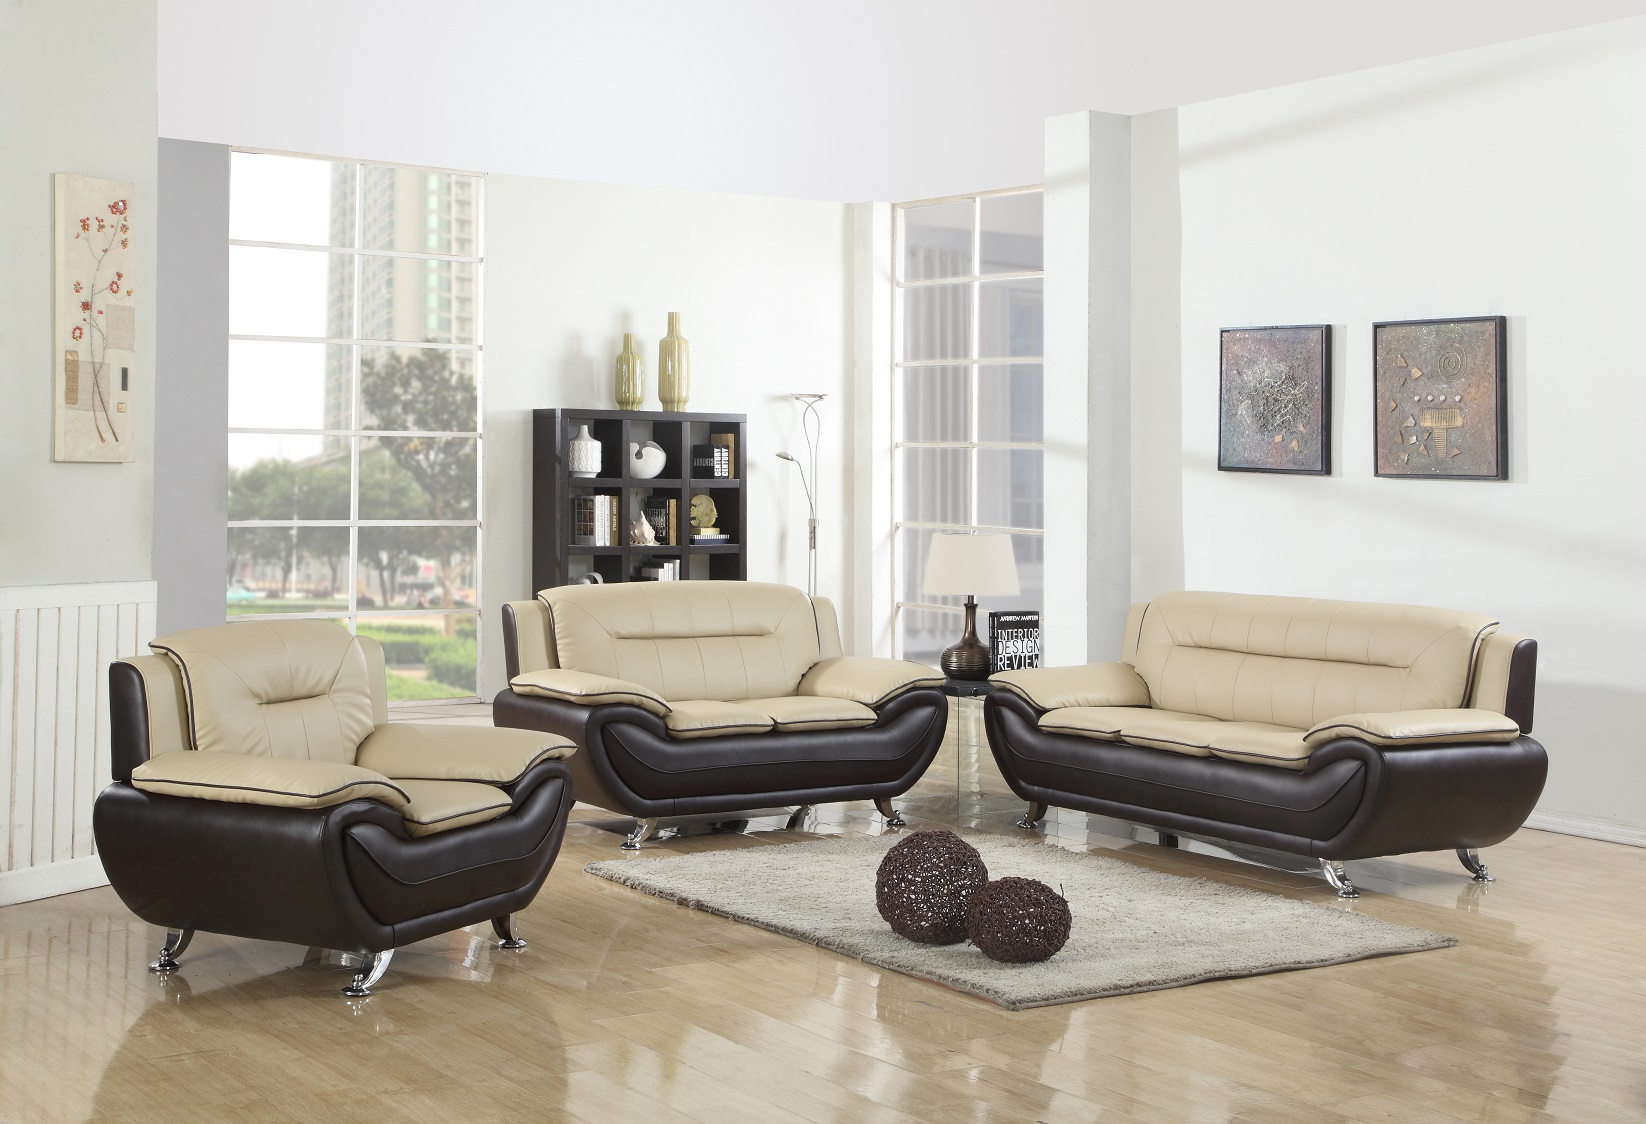 LEATHER STATIONARY LIVING ROOM